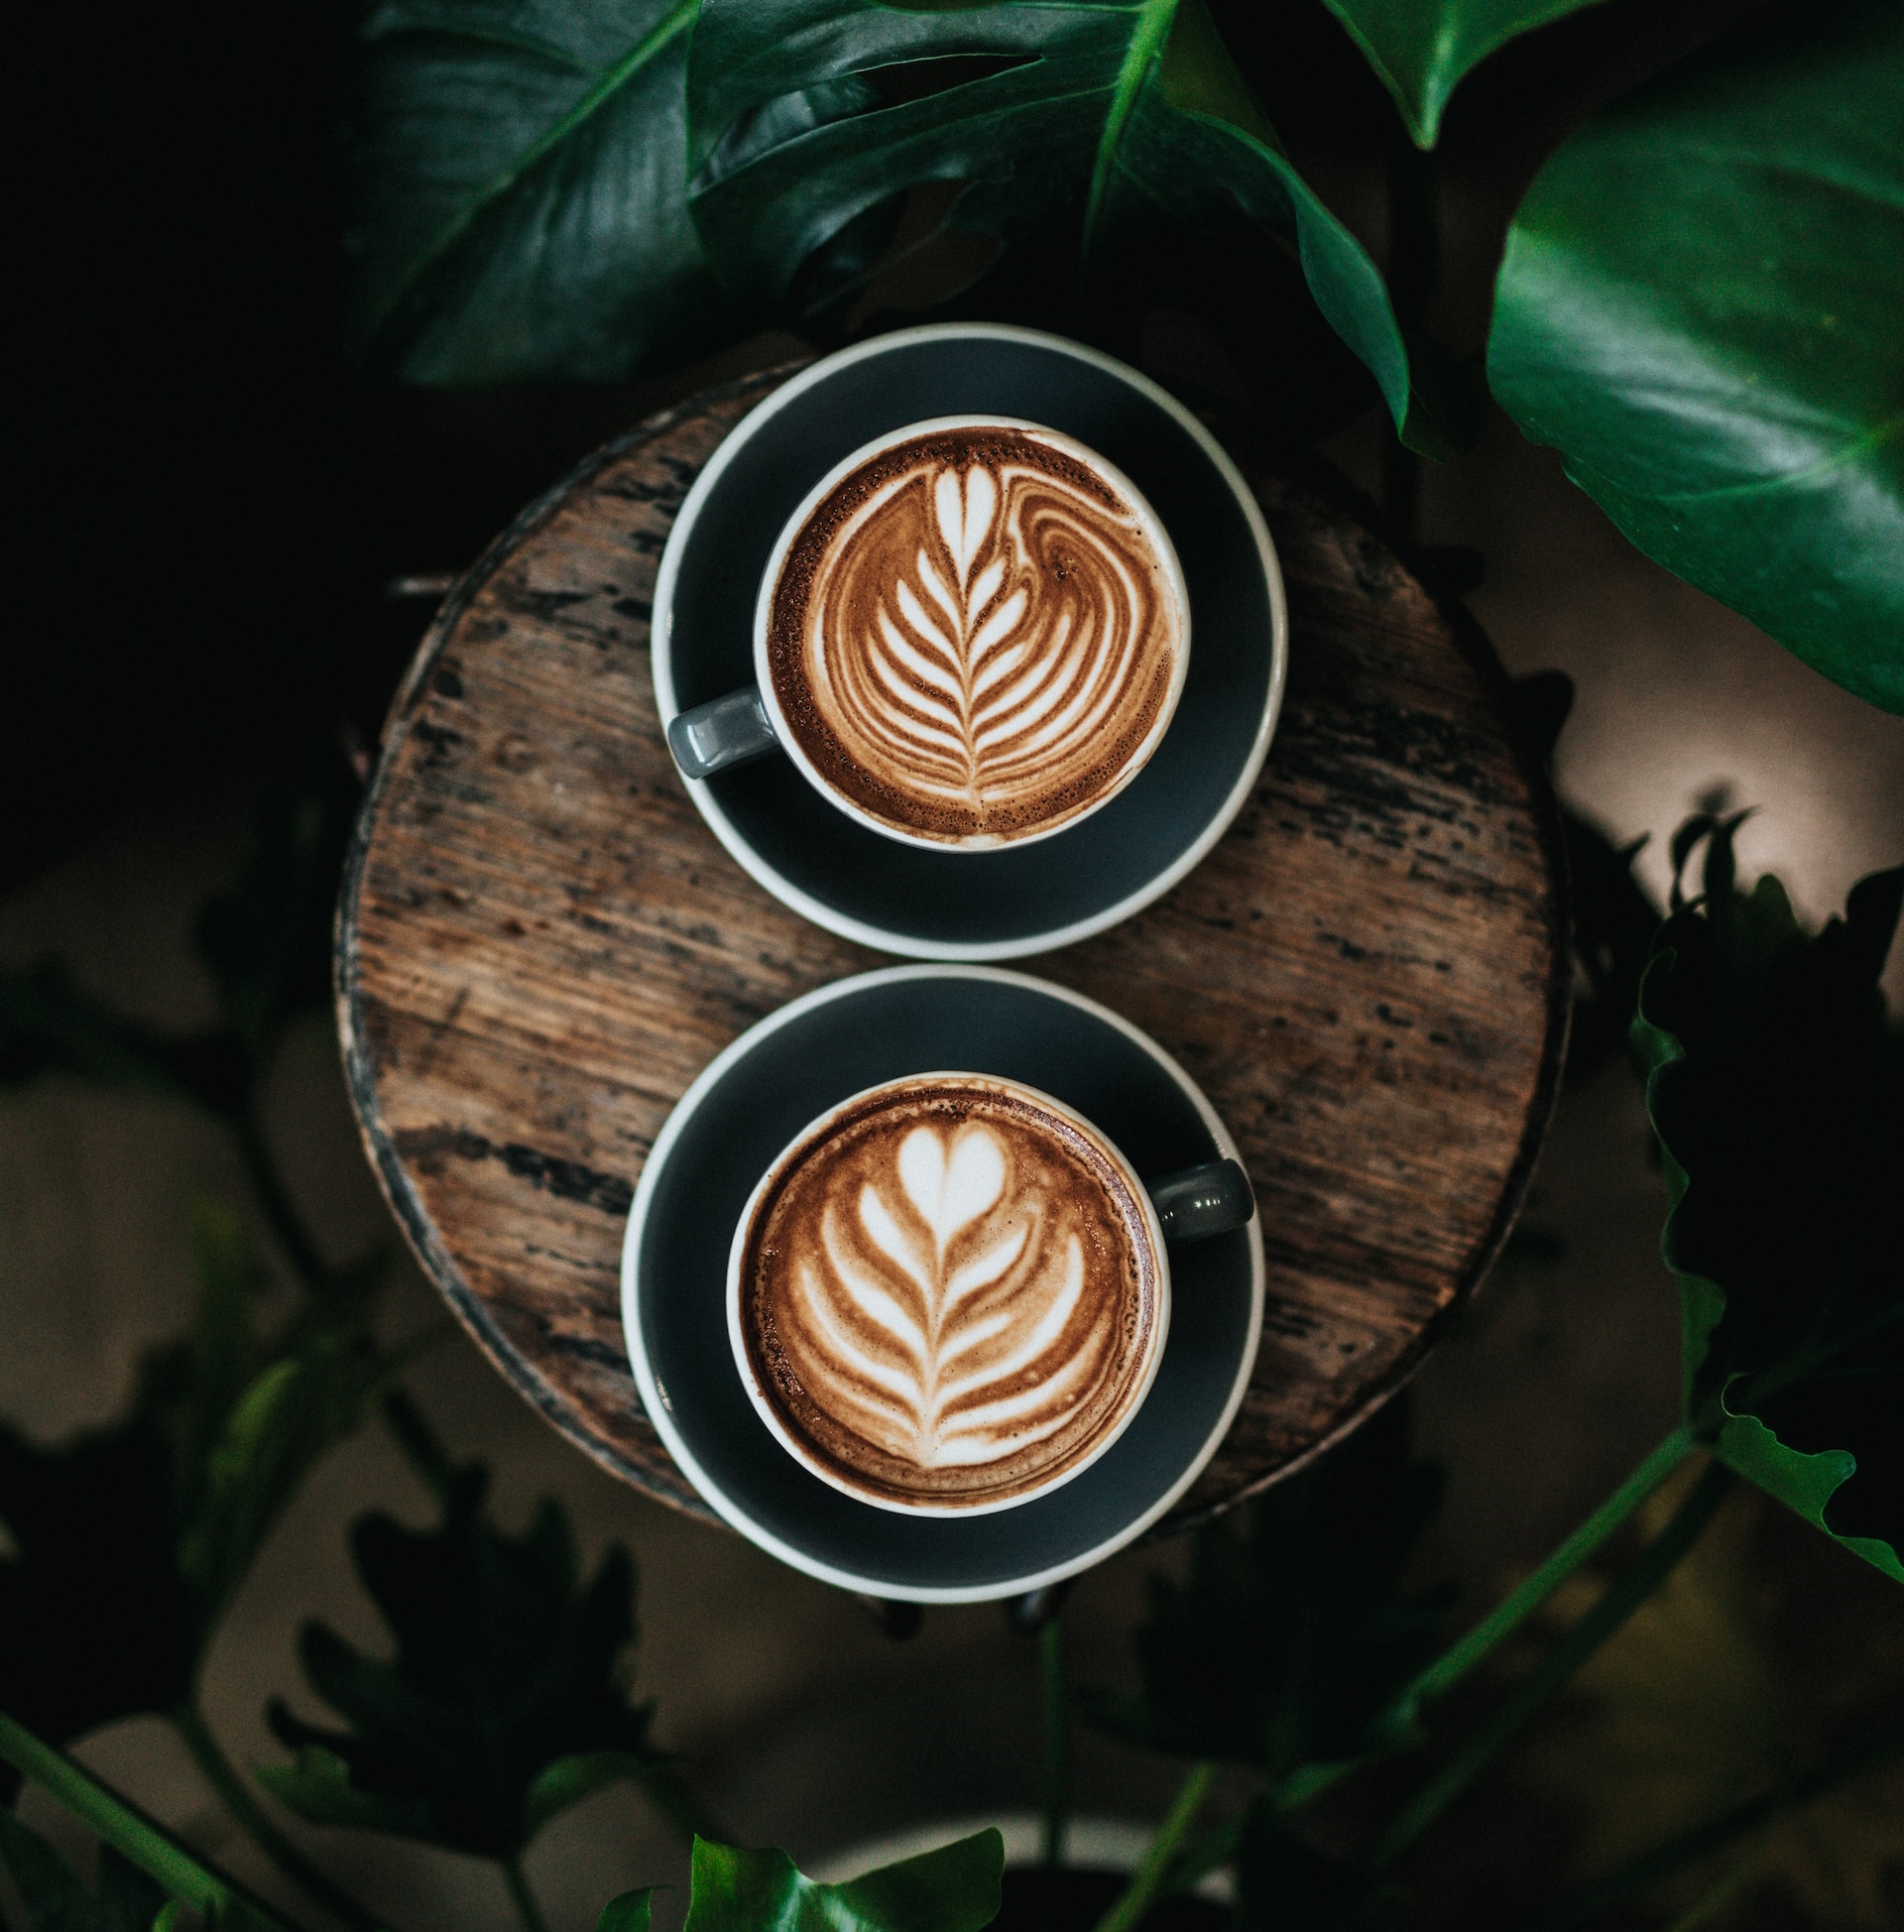 Aerial view of two lattes sitting on a wooden table surrounded by green plant leaves